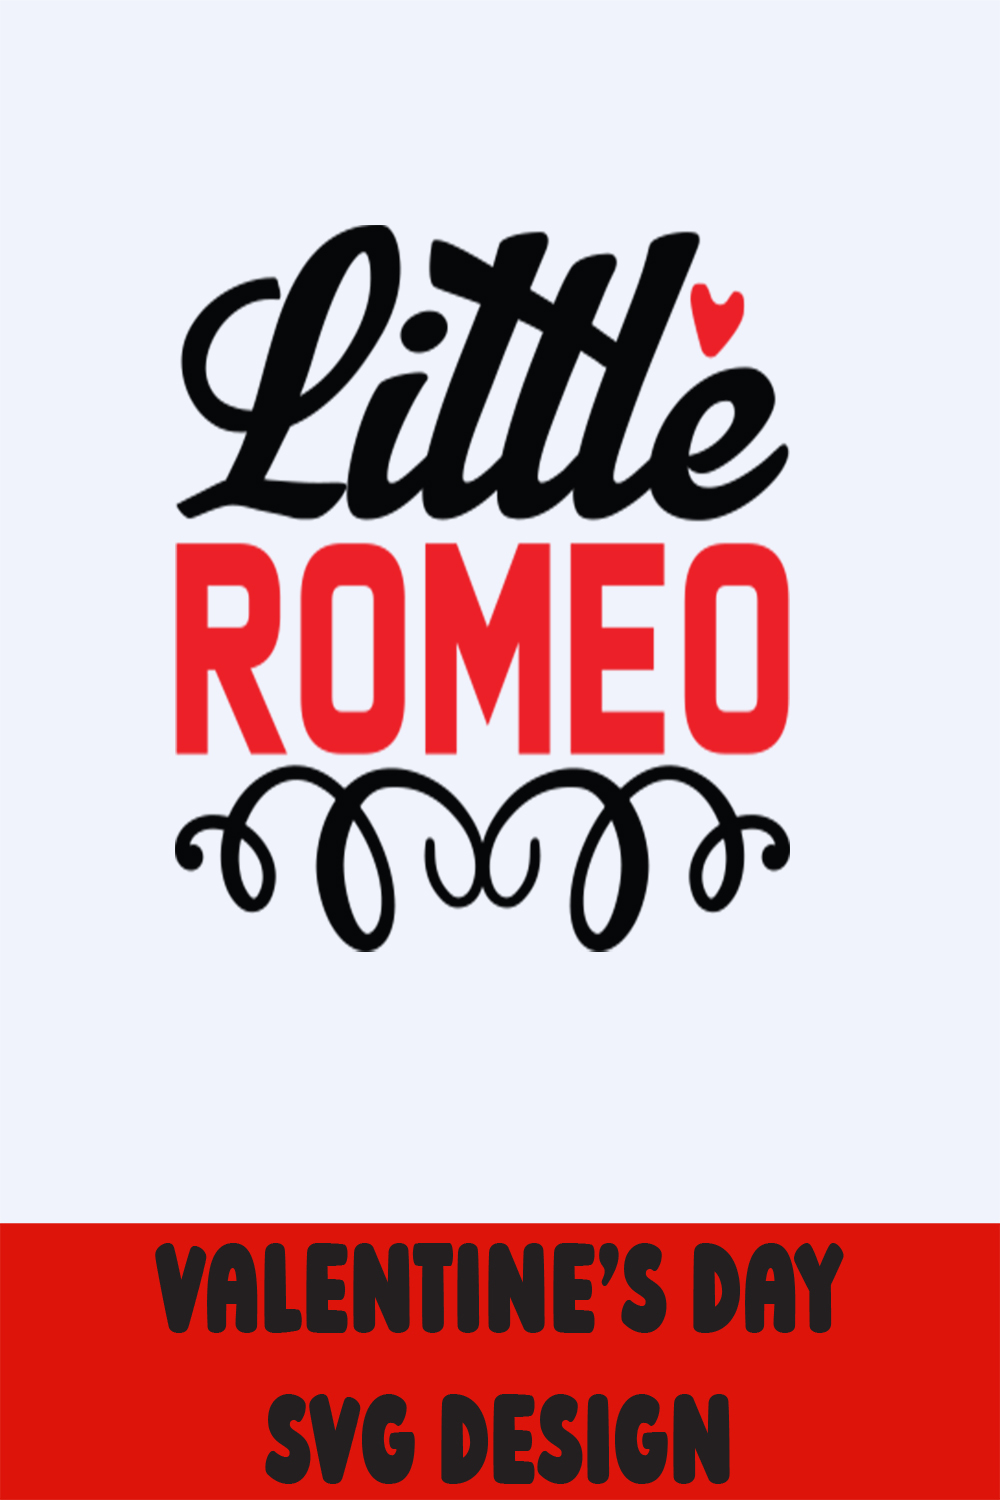 Image with elegant lettering for printing Little Romeo